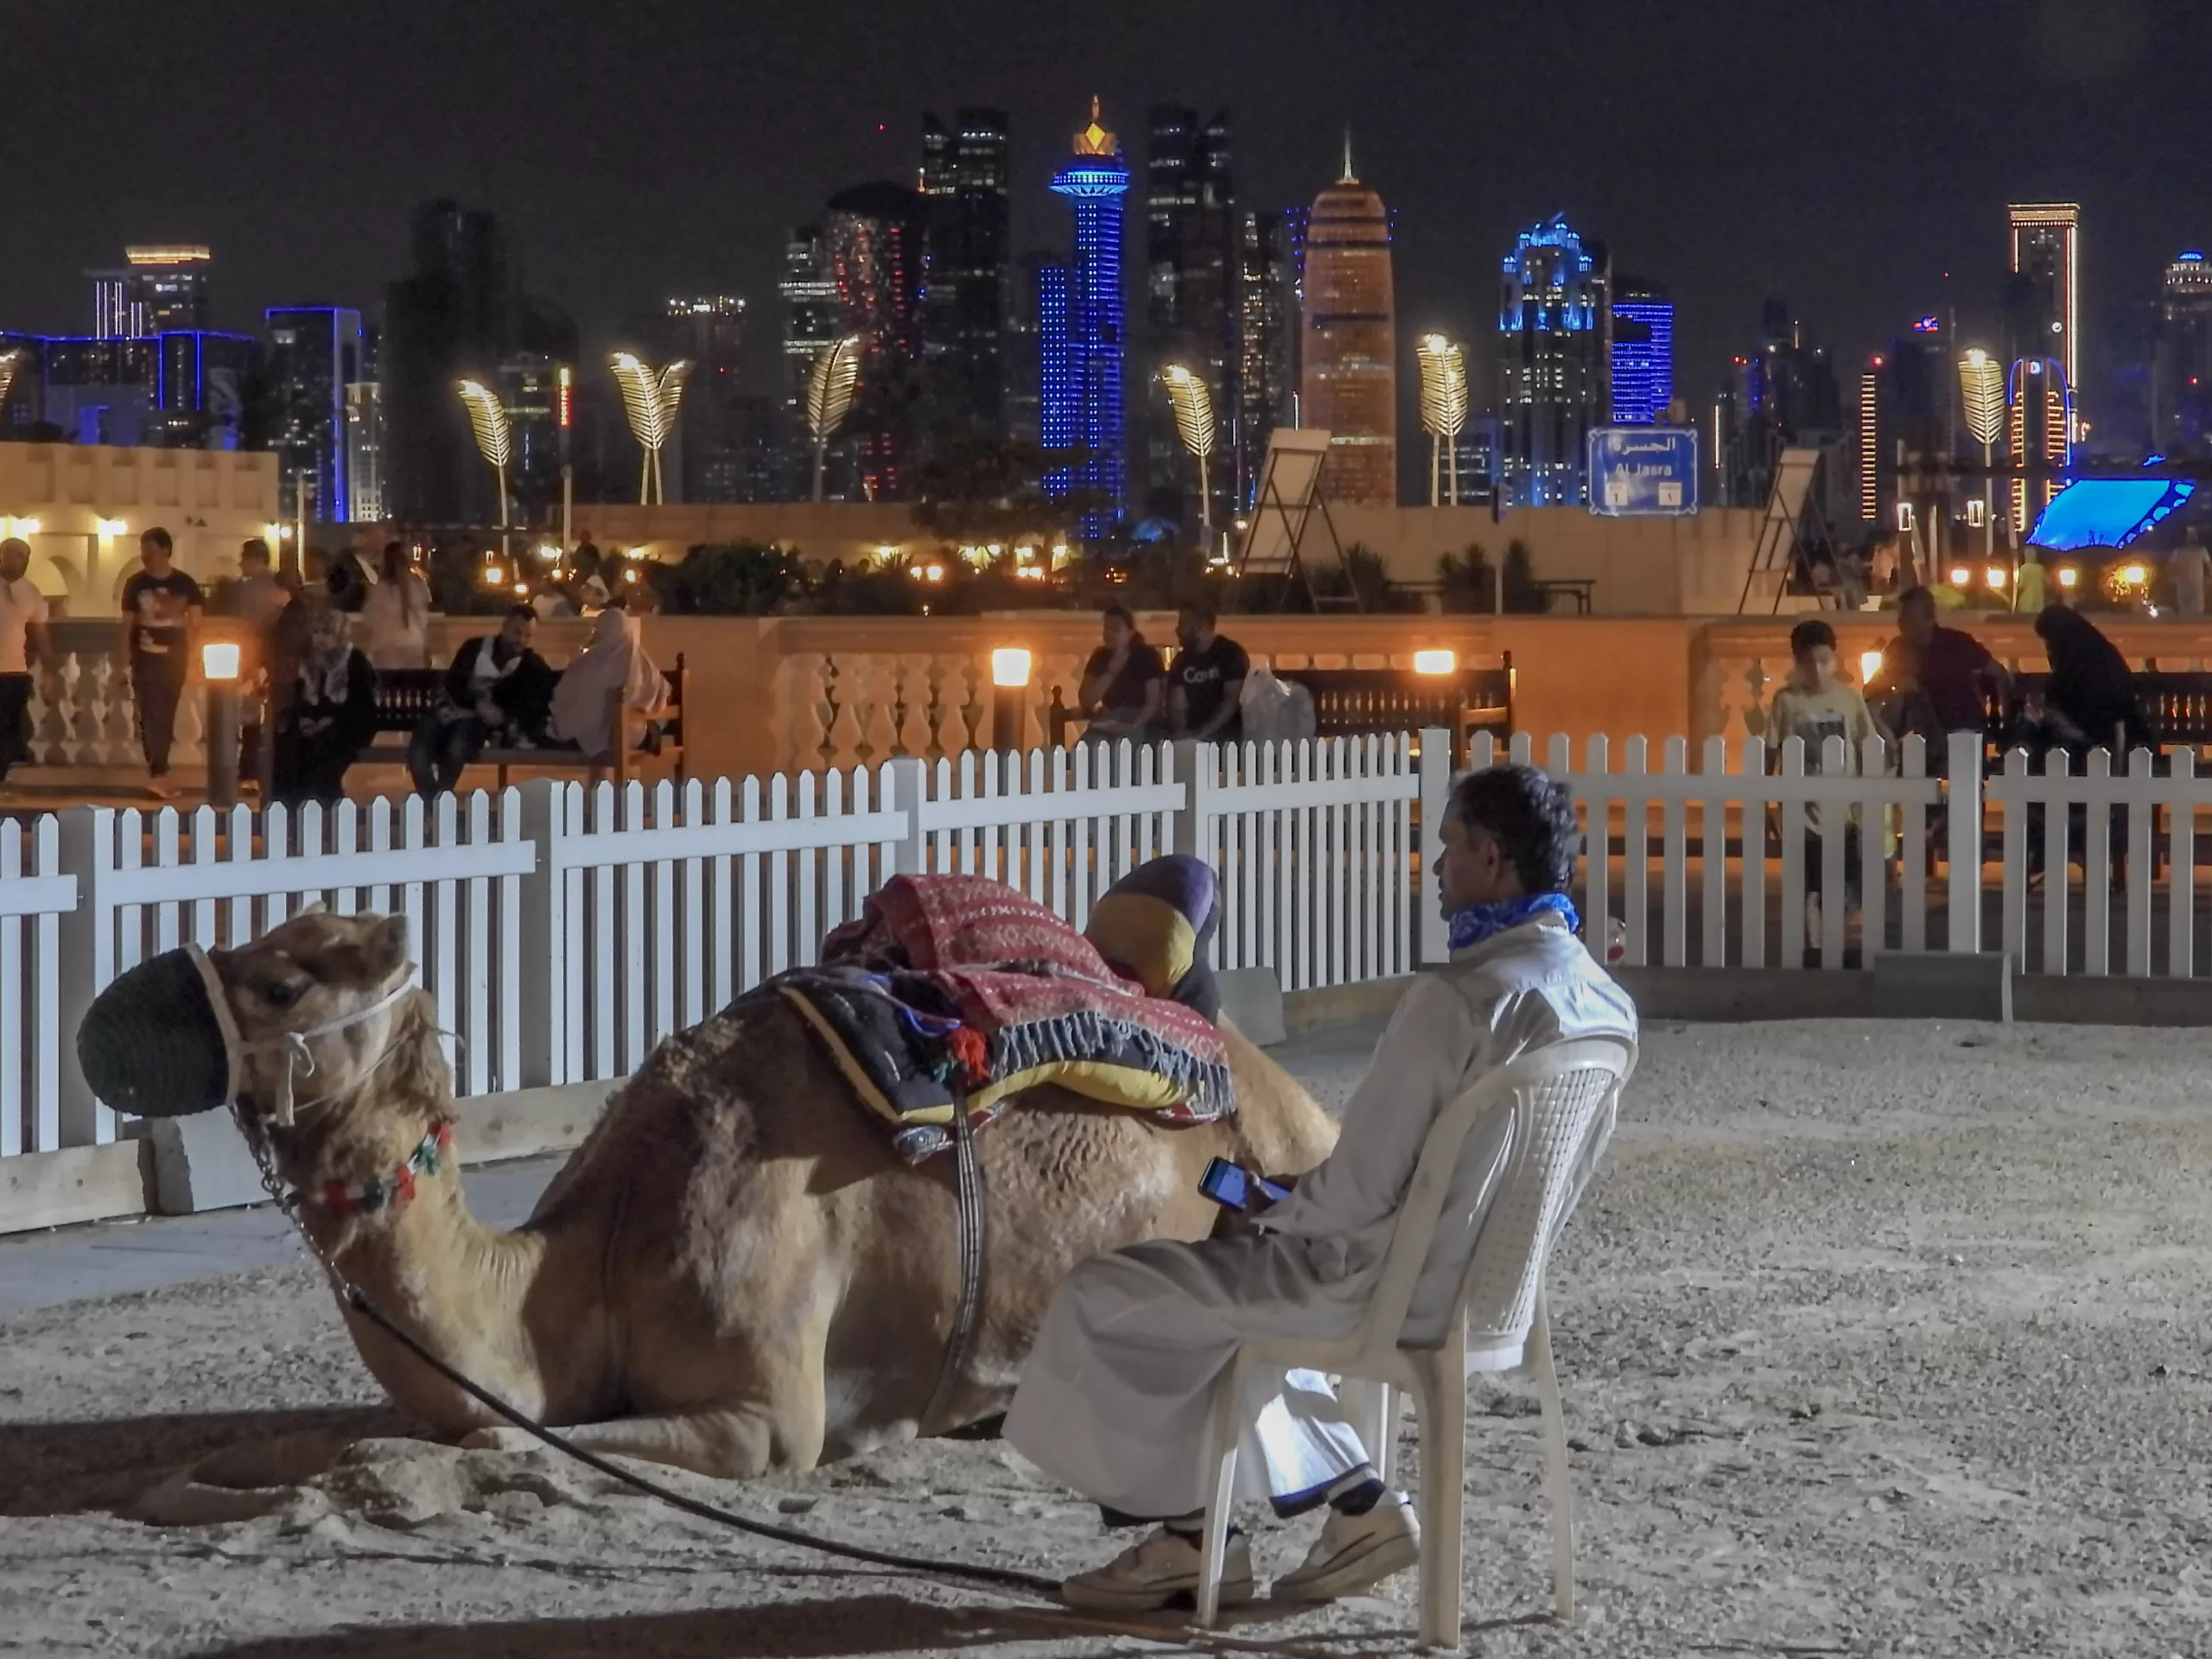 tom with Camel in Doha